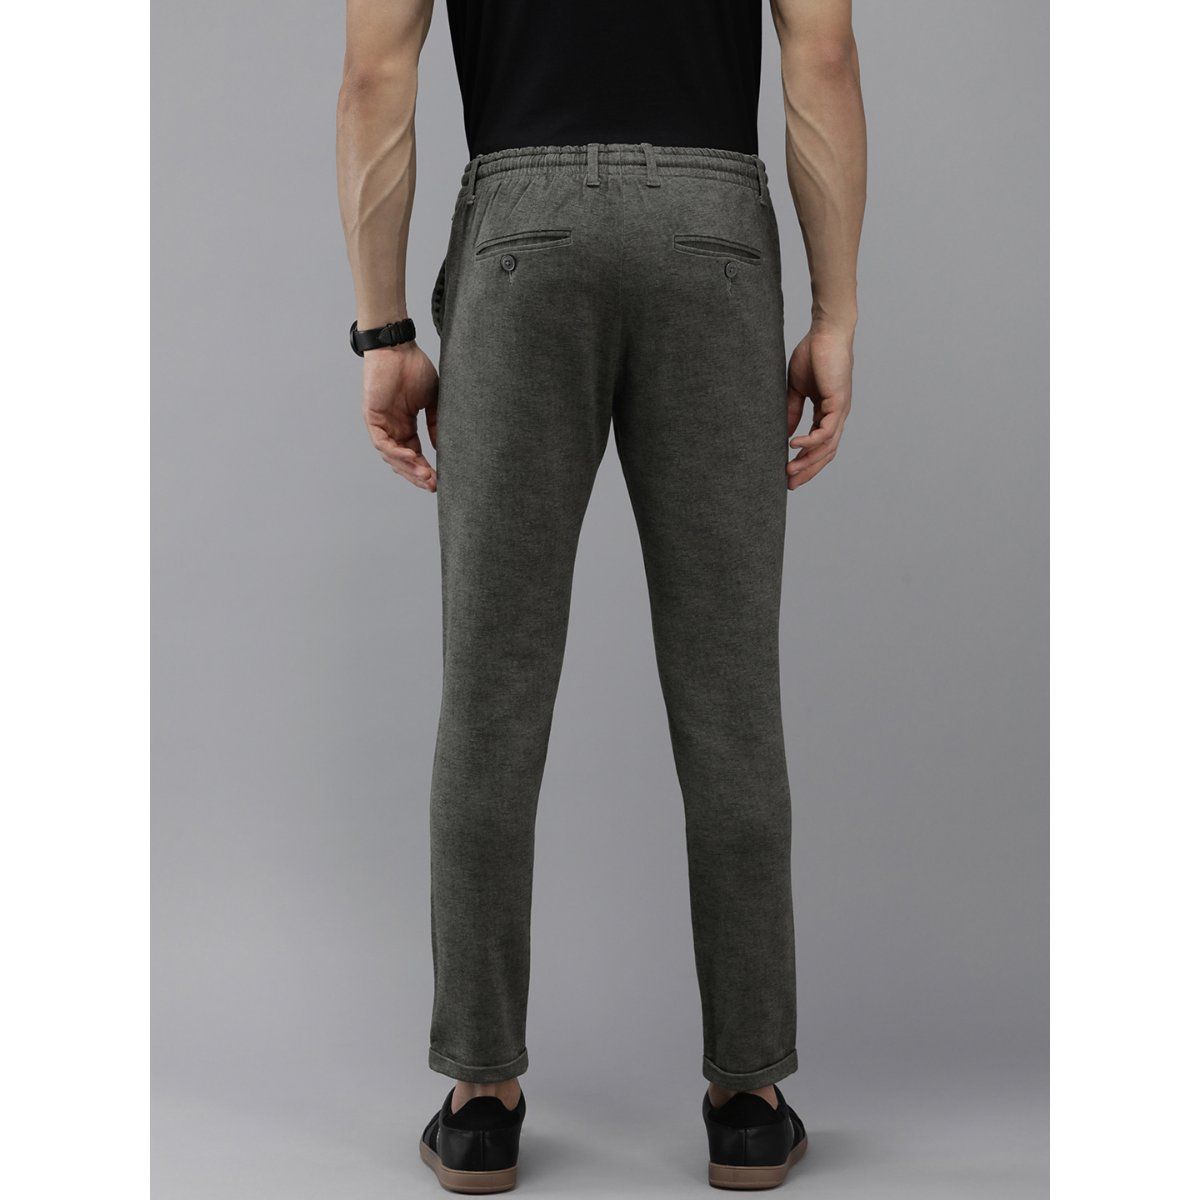 Trousers For Mens Online: Buy Mens Casual Trousers & Pants at Westside –  tagged 